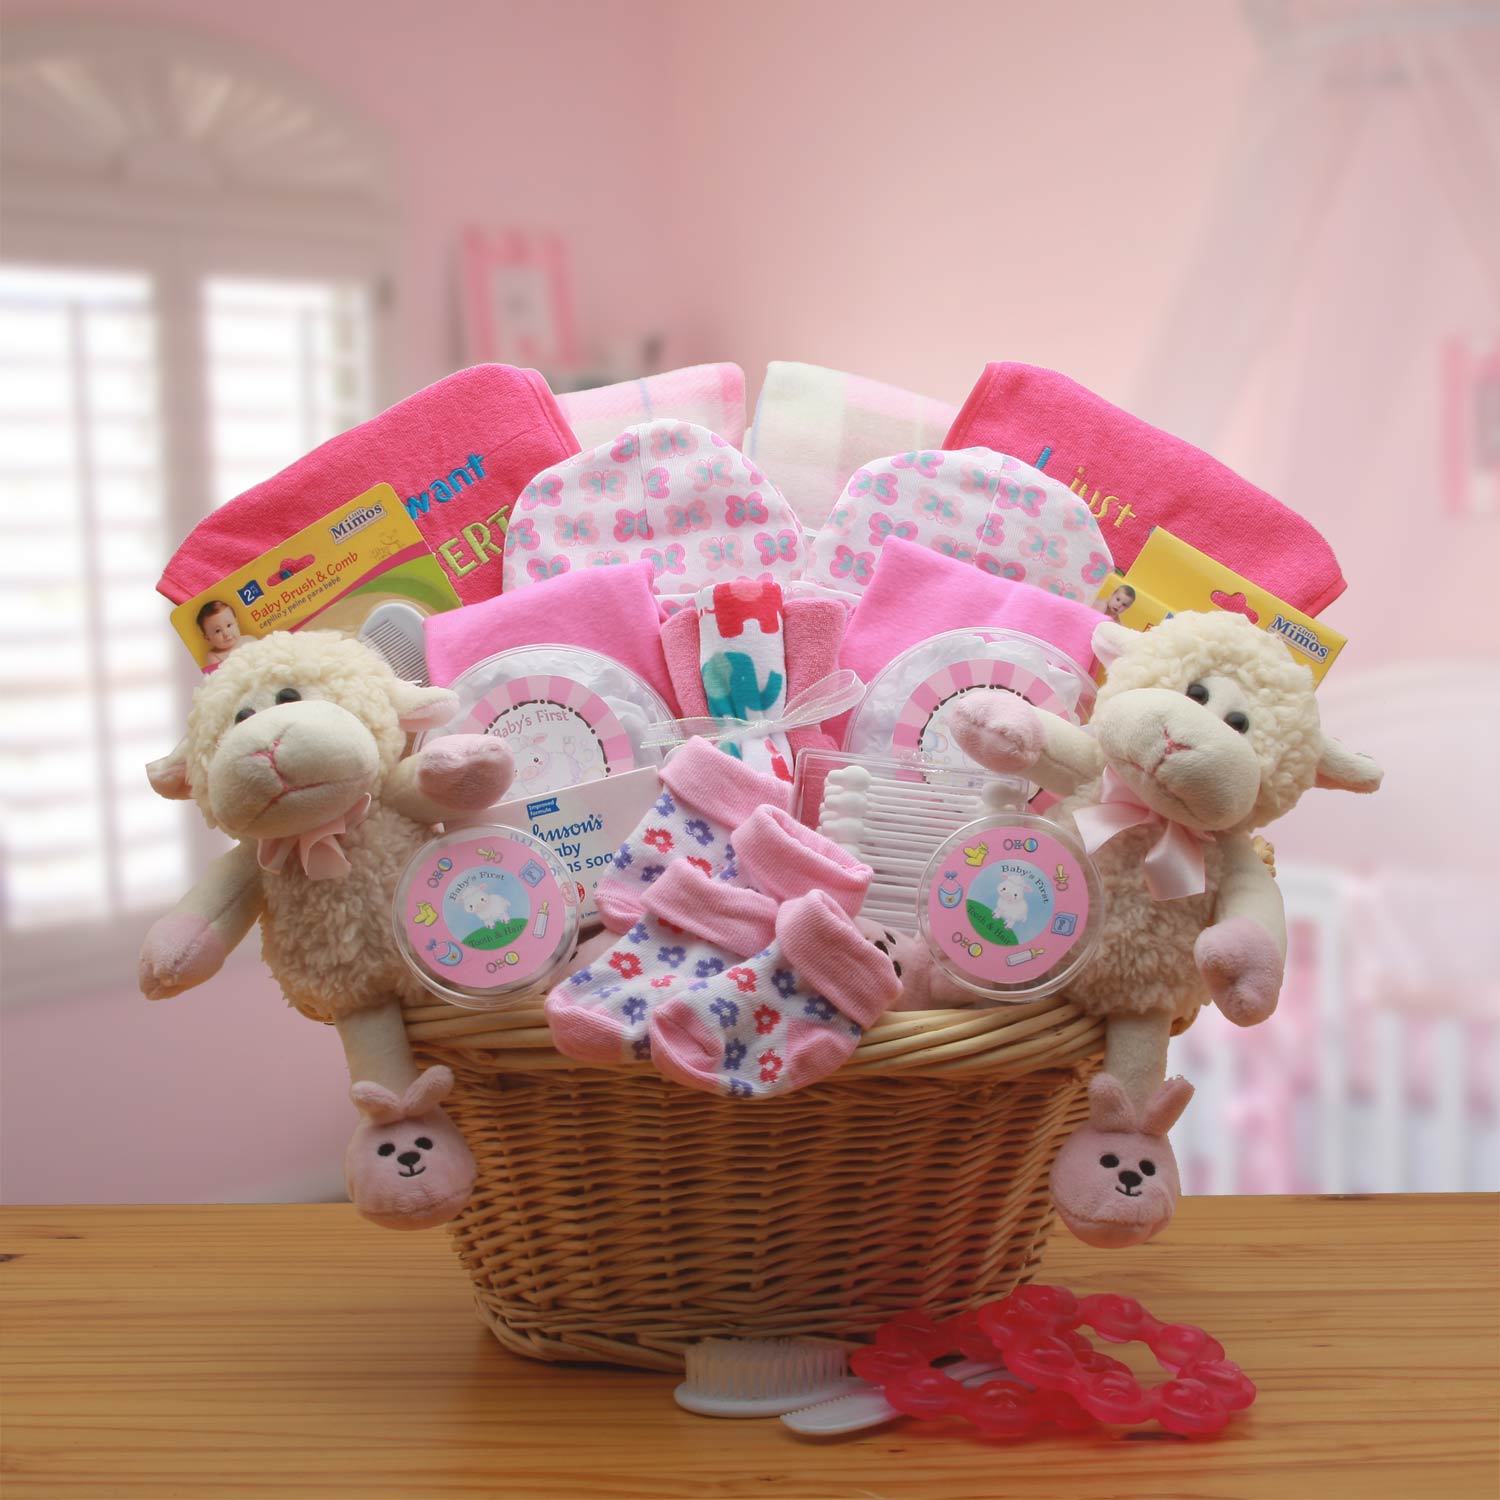 Double-Delight-Twins-New-Babies-Gift-Basket-'-Pink